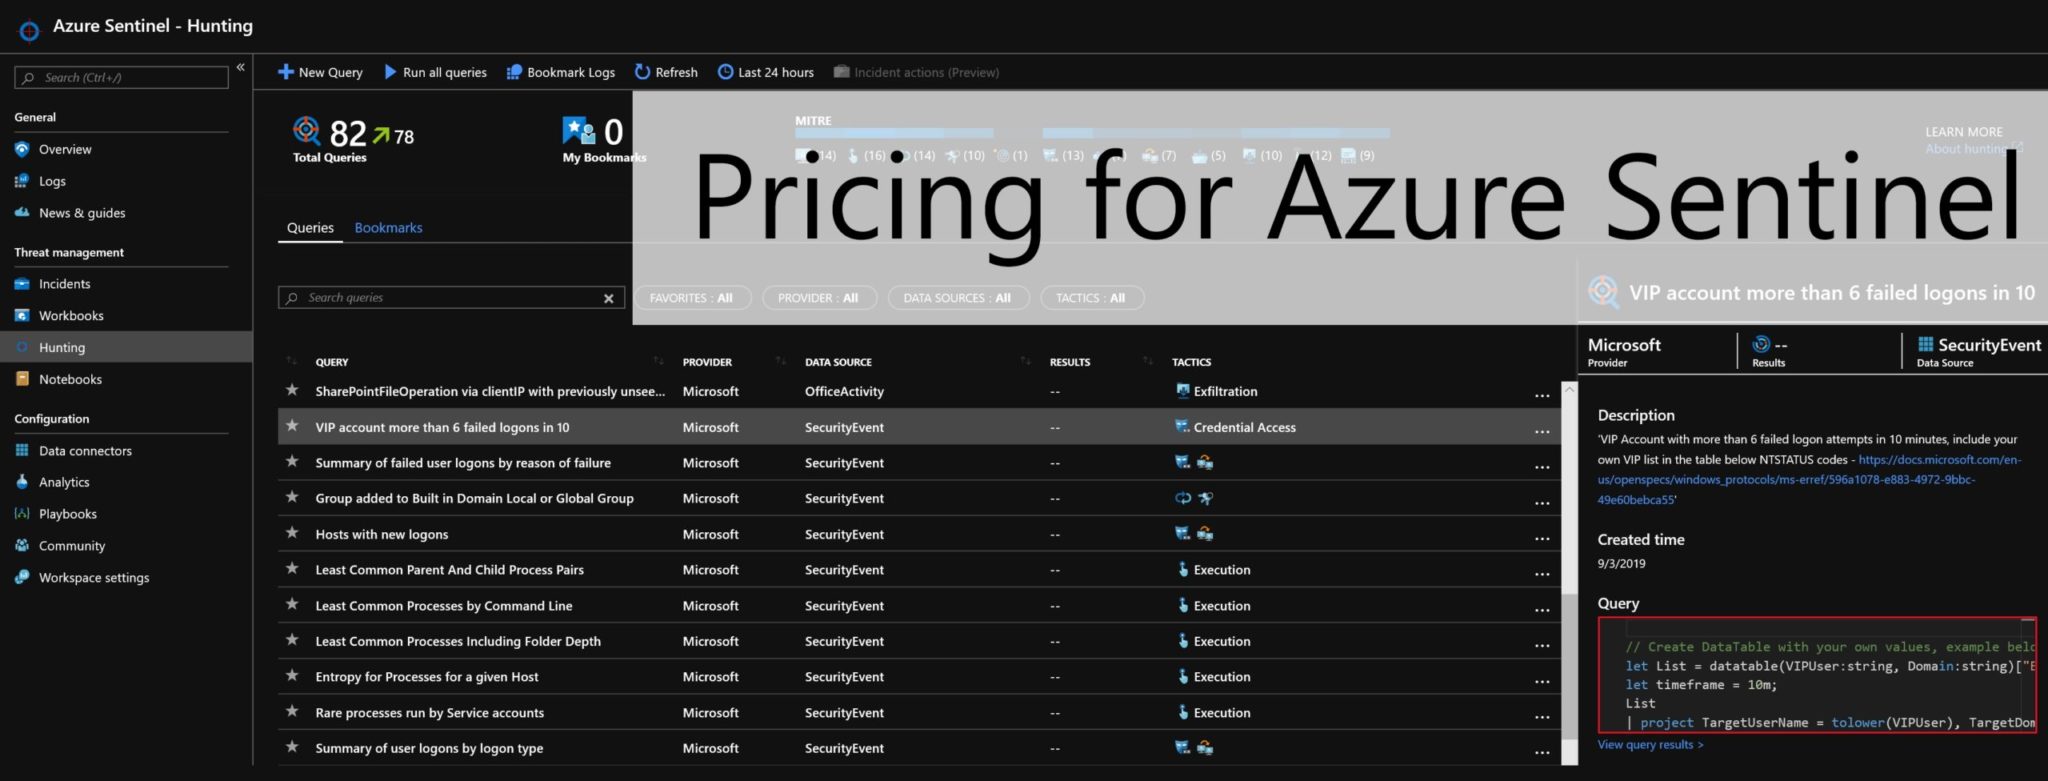 Pricing for Azure Sentinel is GA 9